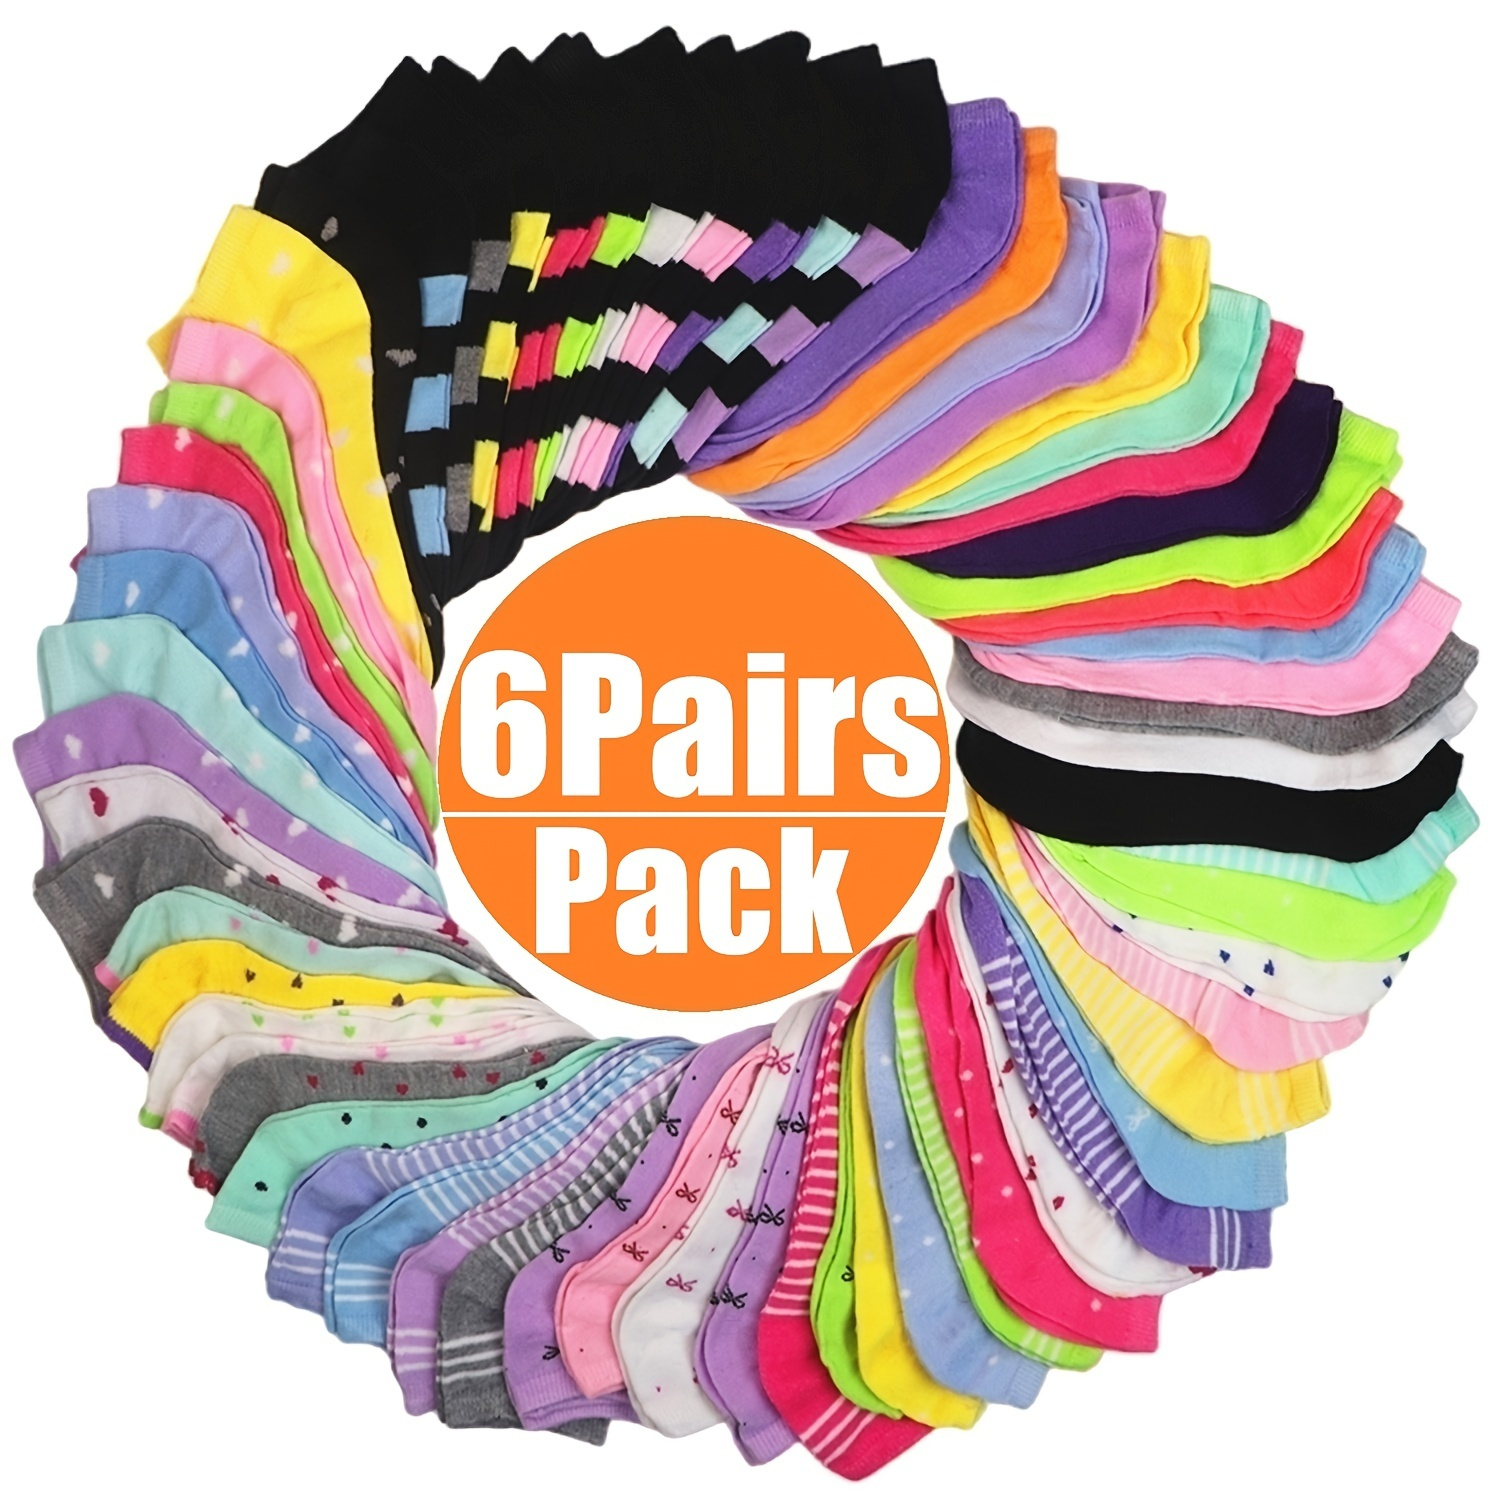 

6 Pairs Candy Color Ankle Socks, Soft & Lightweight Breathable Low Cut Socks, Women's Stockings & Hosiery